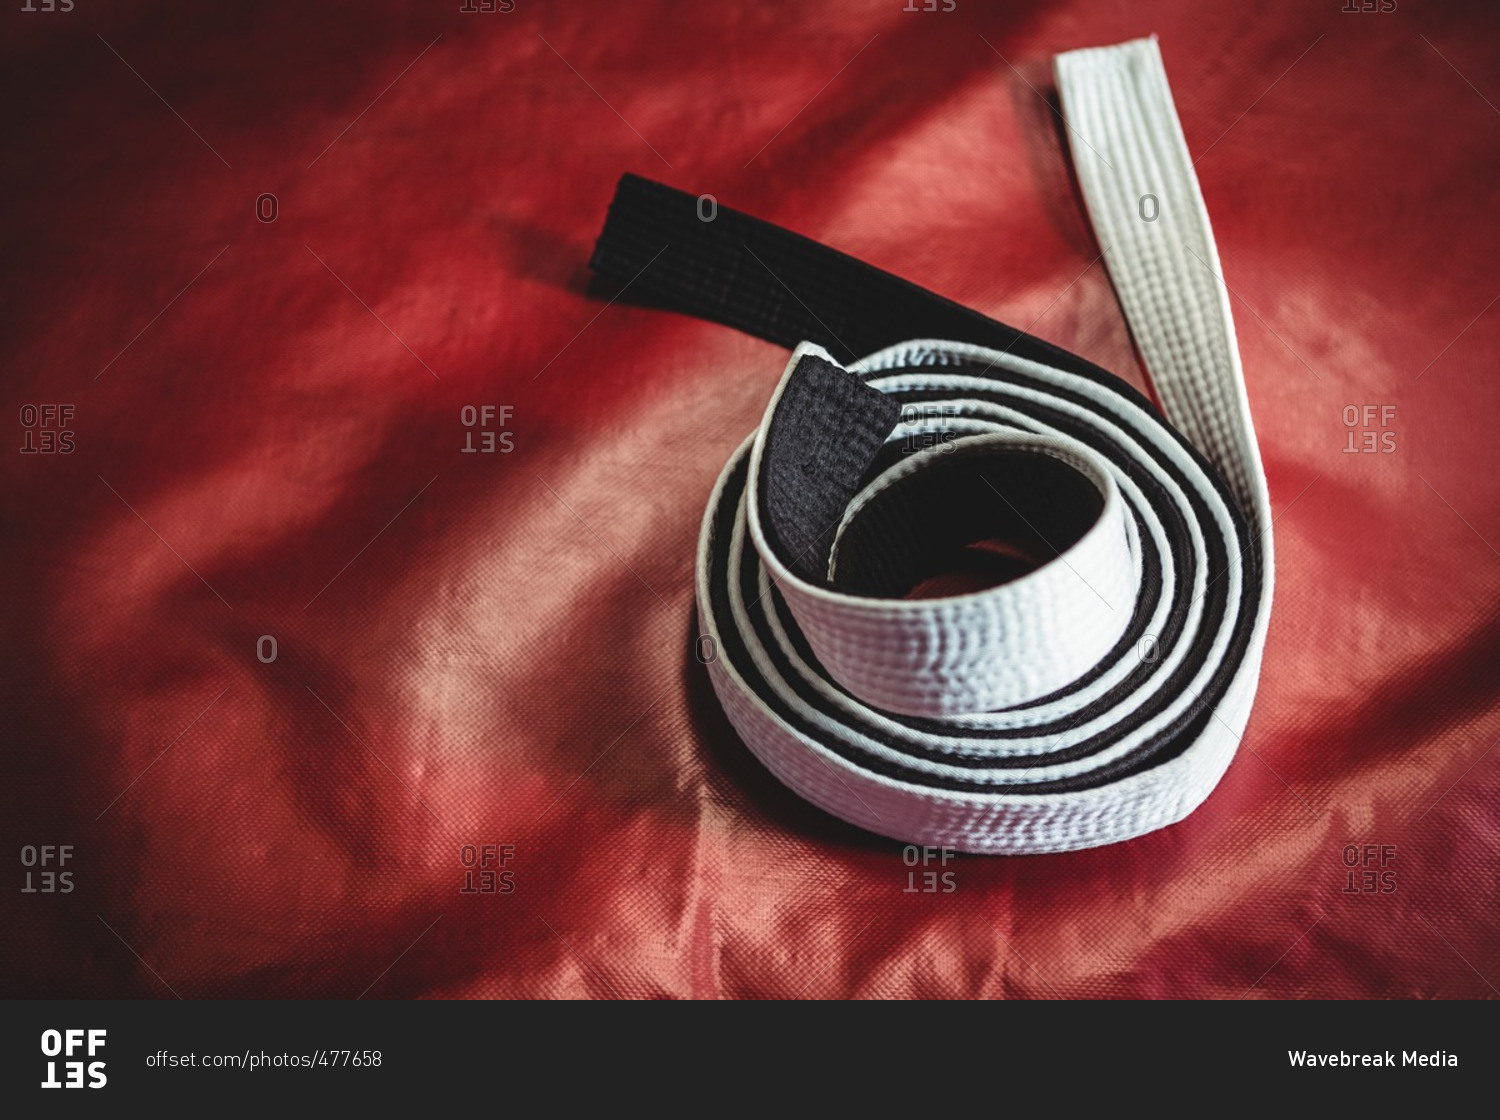 Rolled -up karate white and black belt on red background